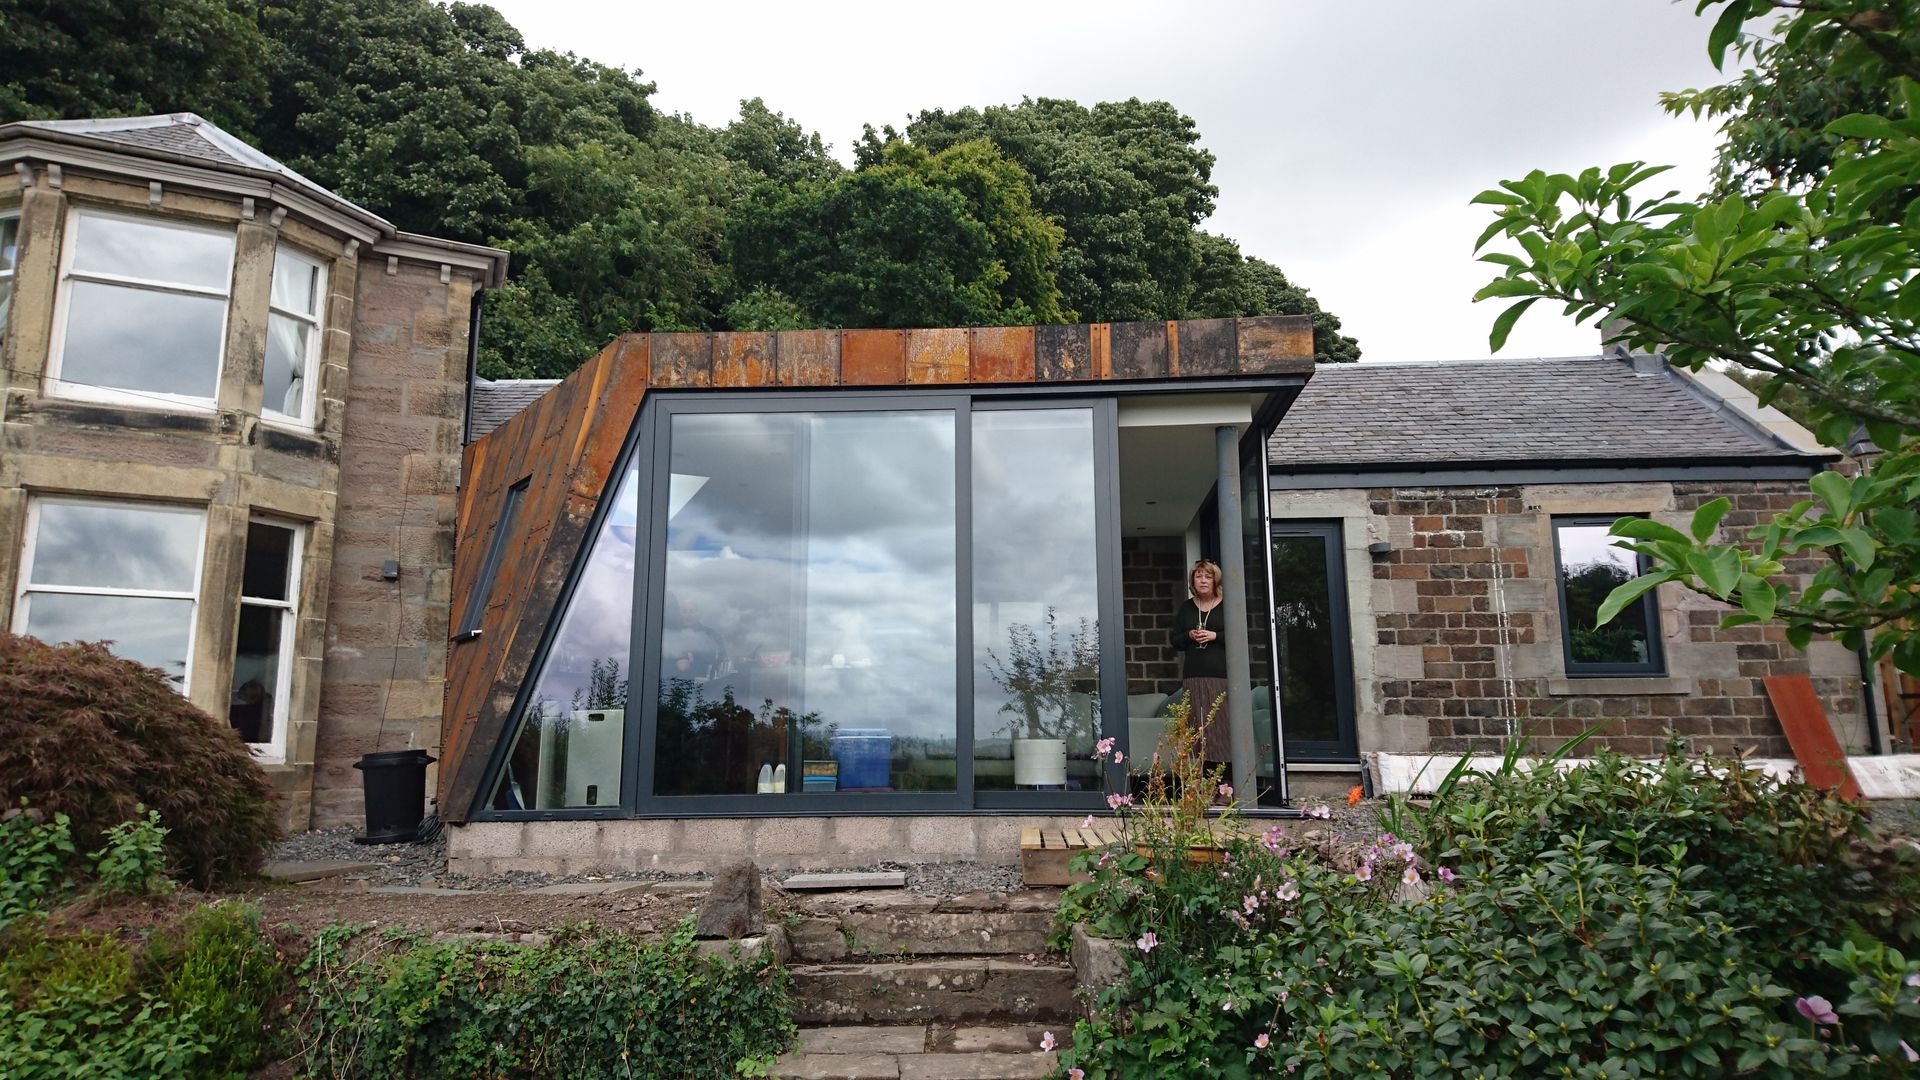 Large sliding doors allow the corner to fold away creating a stronger connection between inside and out. Woodside Parker Kirk Architects منازل حديد Glass sliding doors,Corten steel cladding,extension,old meets new,Garden,Extension